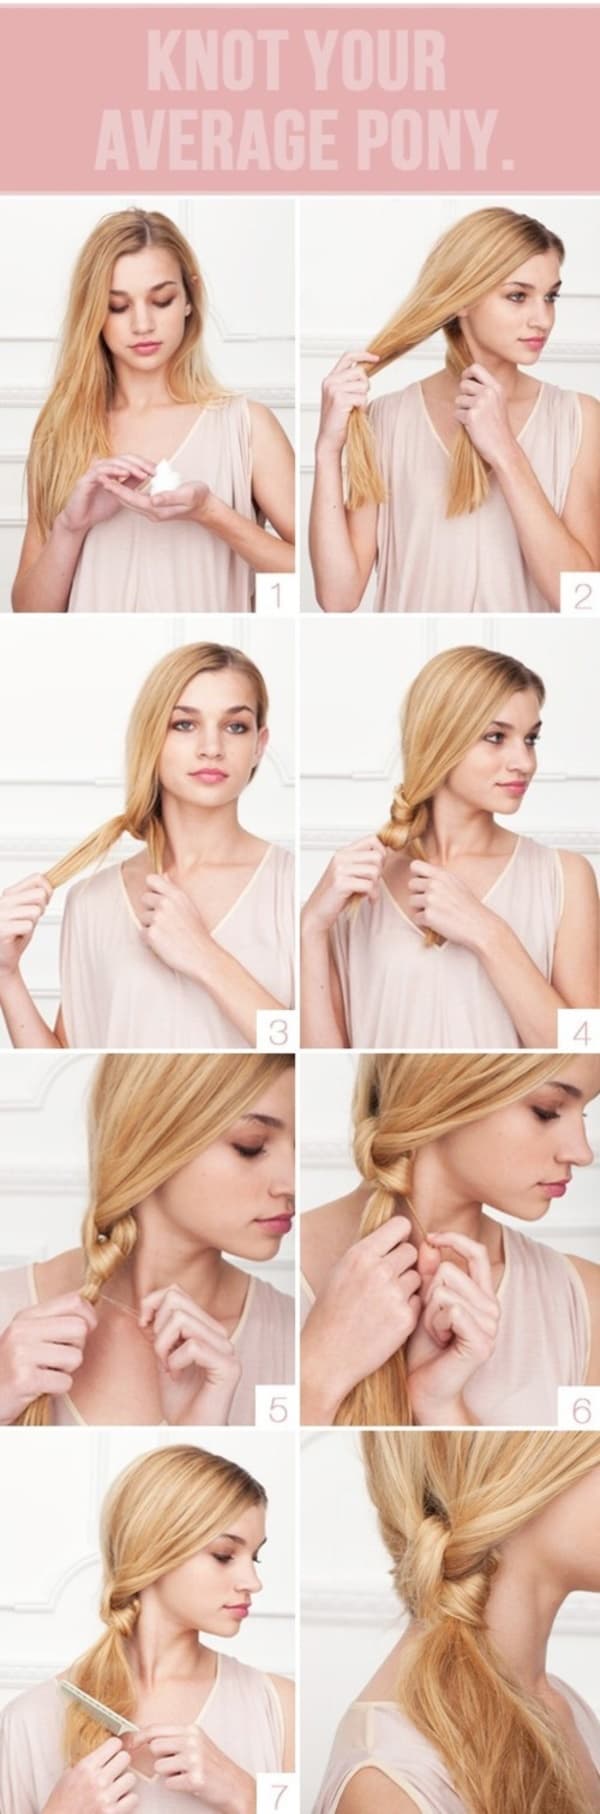 30 Hairstyles that will Take 5 Minutes or Less | Quick and ...